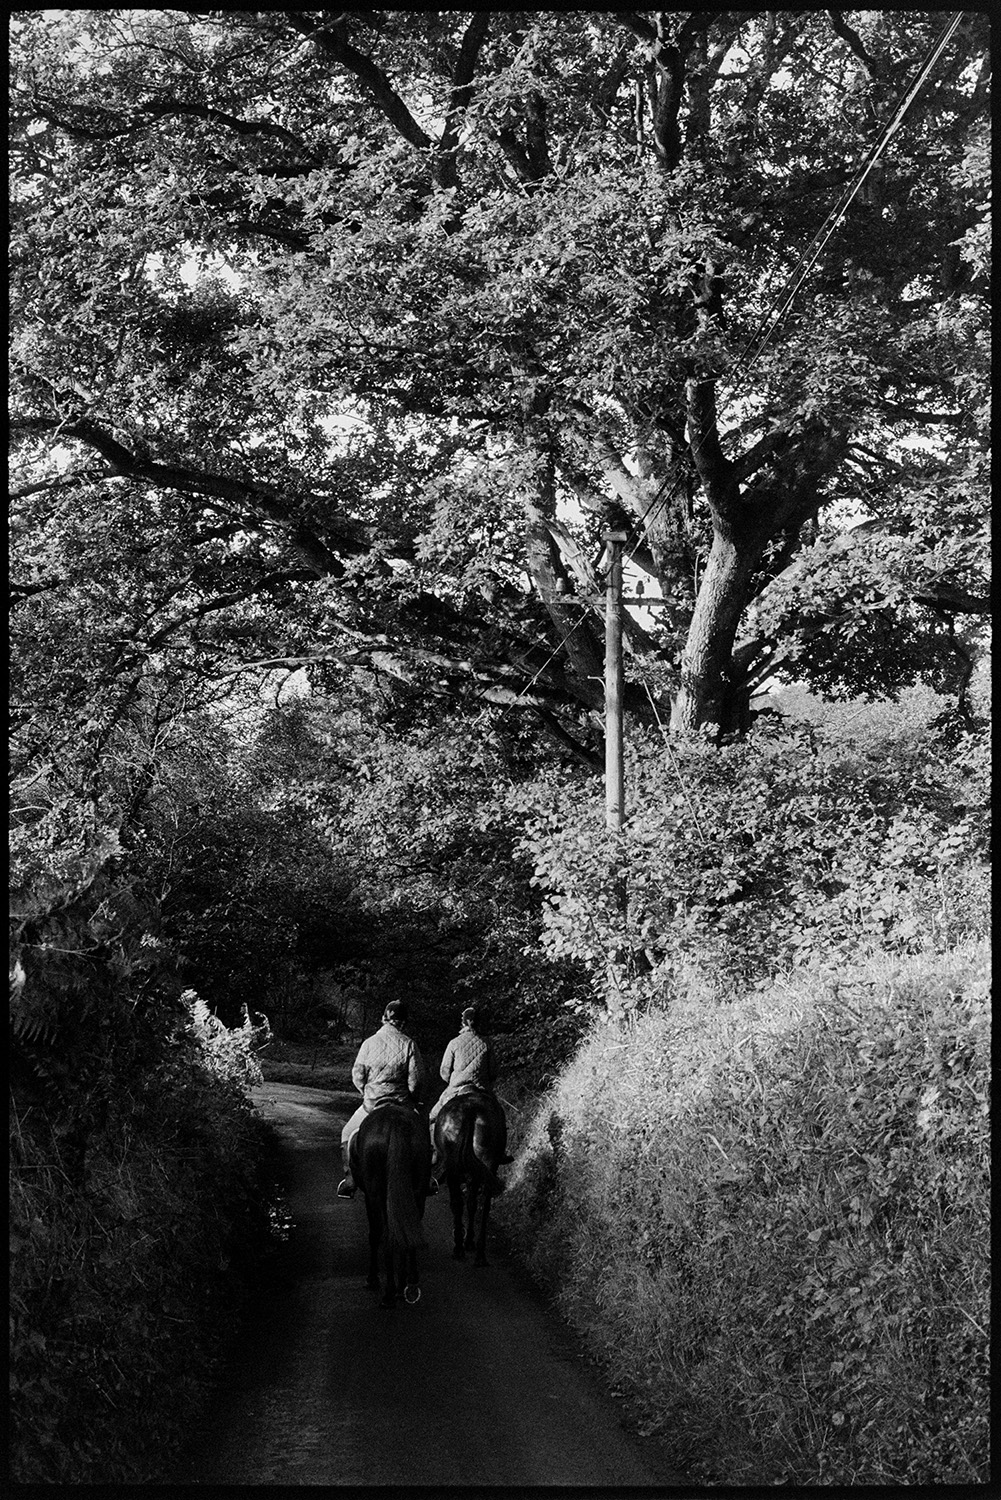 Two riders in lane under trees.
[Two horse riders riding along a narrow lane lined with a hedge and trees at Addisford, Dolton.]